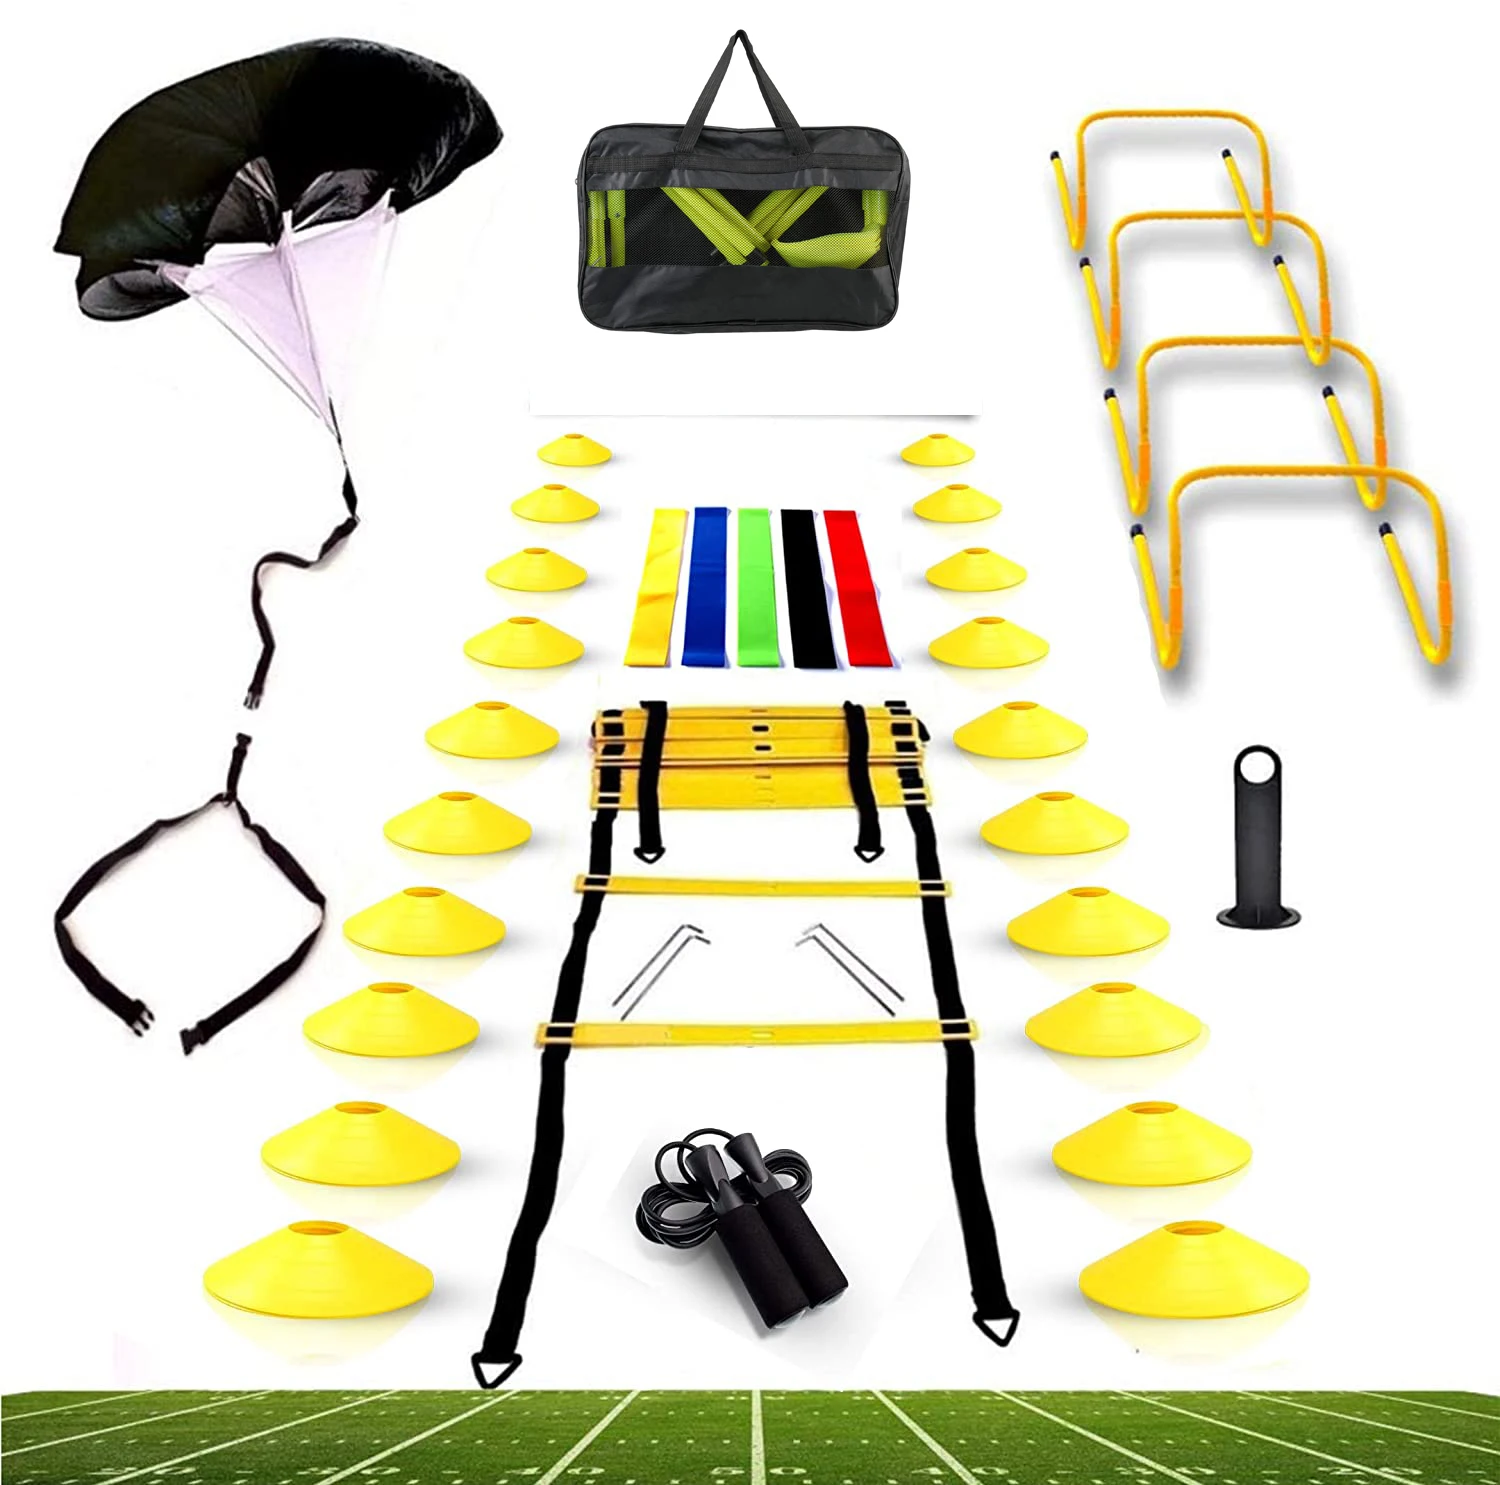 Speed Agility Training Set Footwork Agility Ladder and Hurdle Training Sets Soccer Training Equipment for Kids and Adult